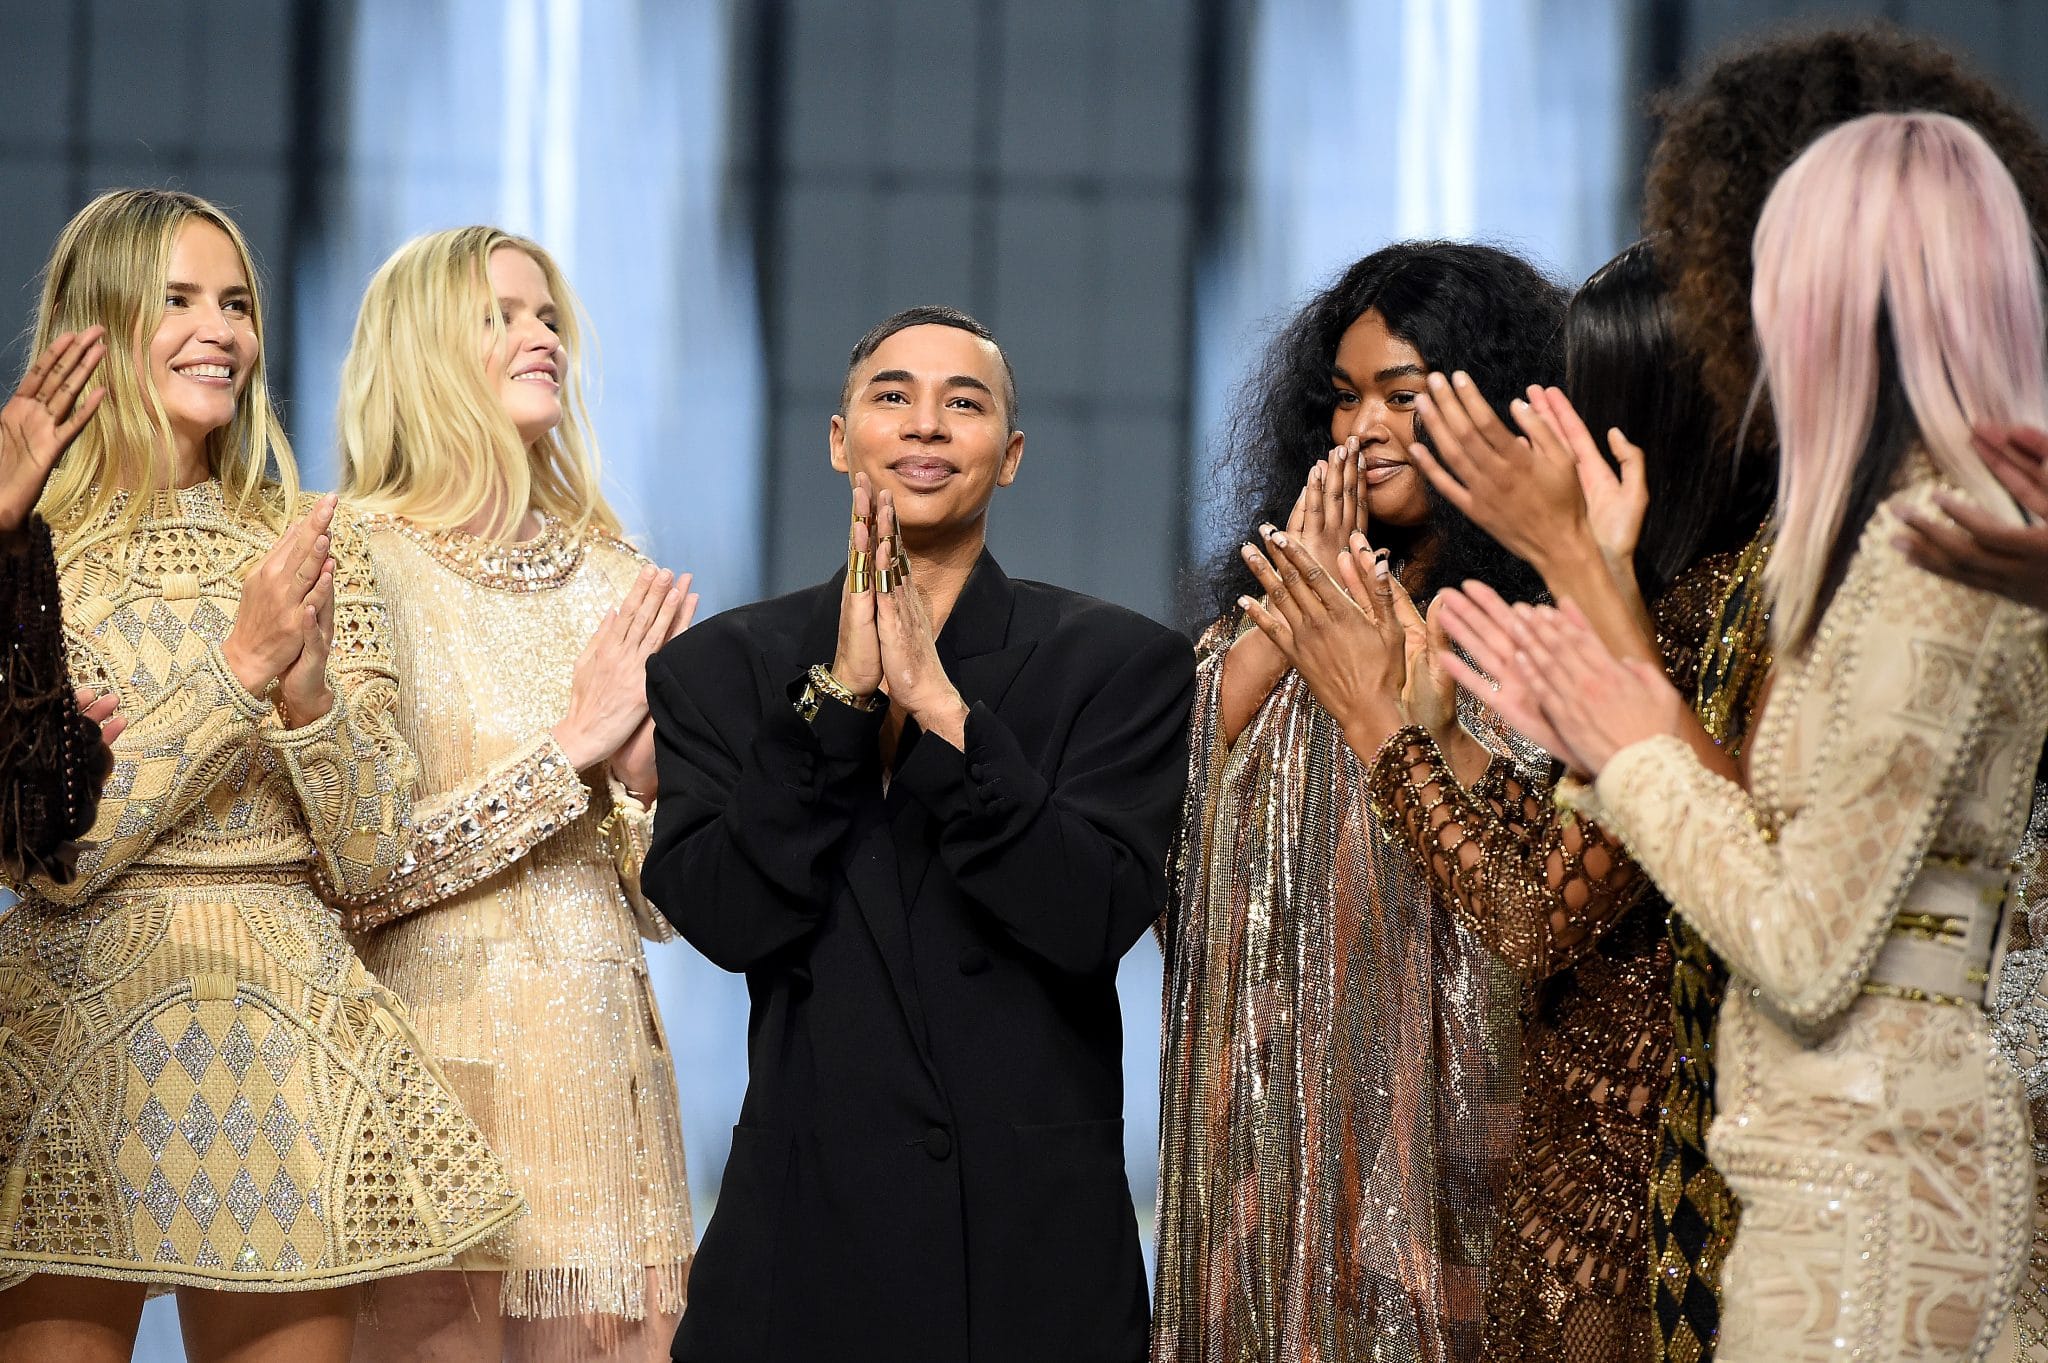 Elendighed marmelade Overskæg Balmain designer Olivier Rousteing talks about a serious fire accident that  changed his life - Archyworldys